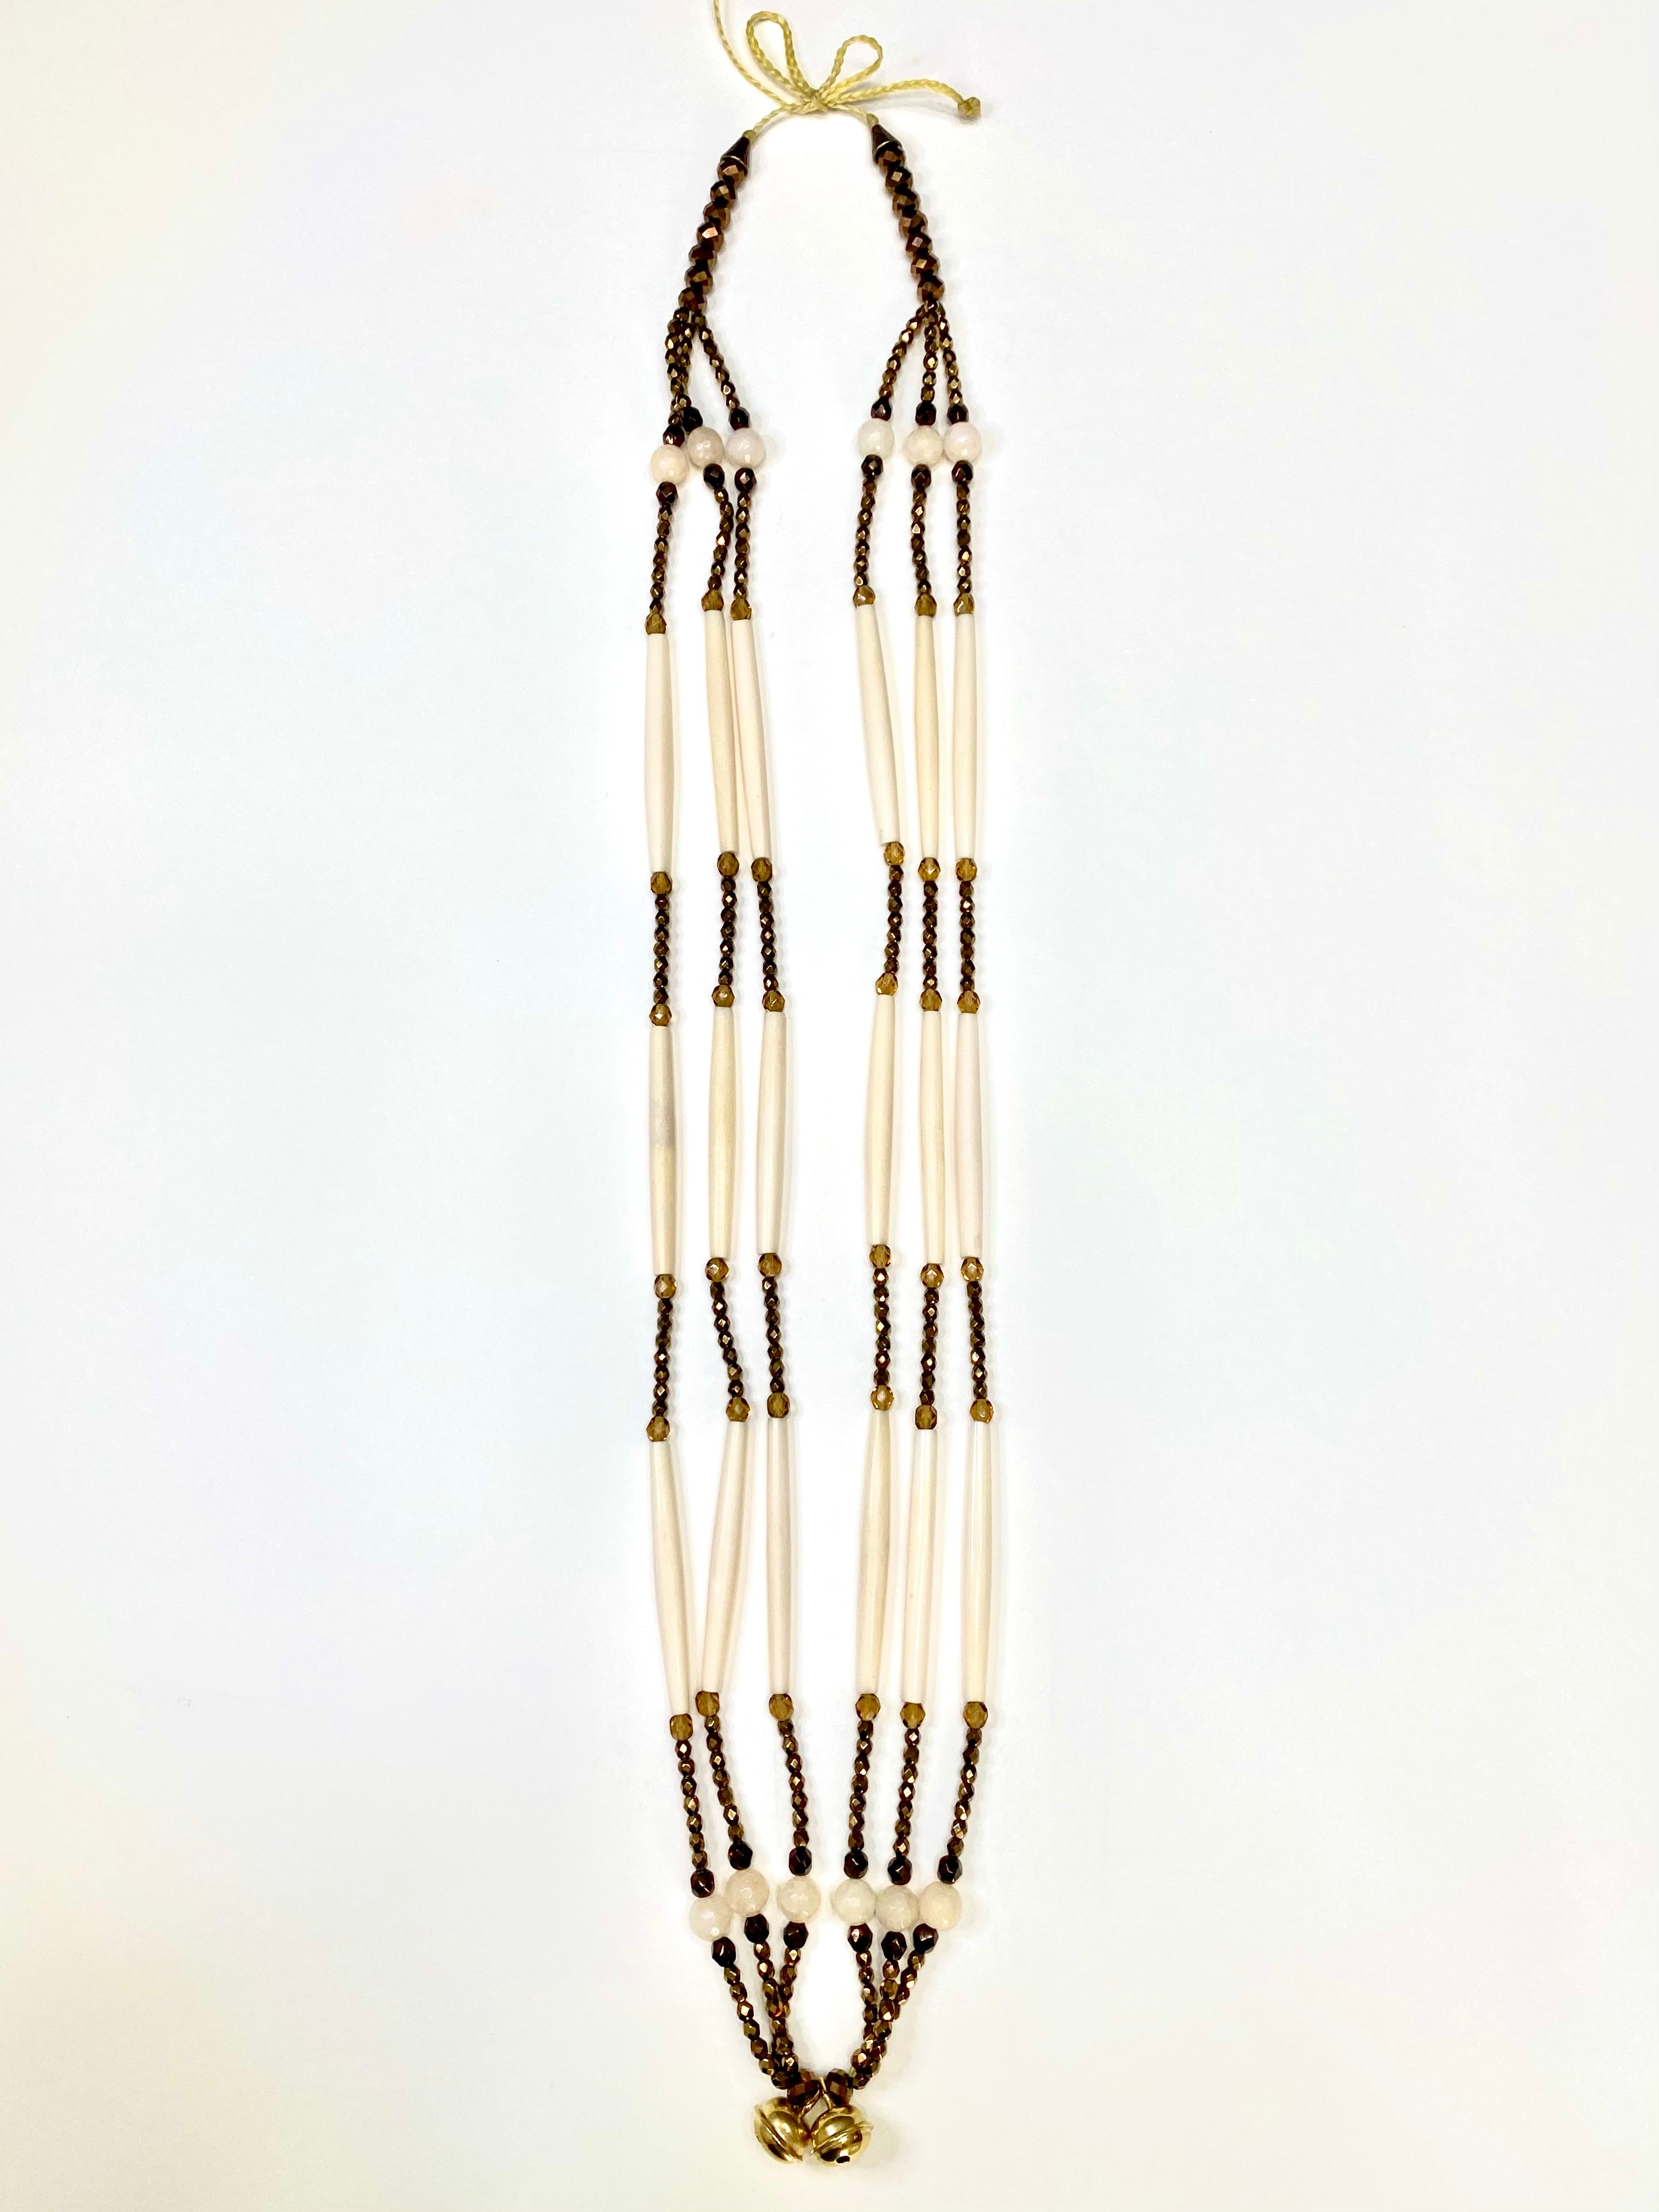 Handcrafted Beaded Agate and Bone Necklace from Africa - Maneray | NOVICA